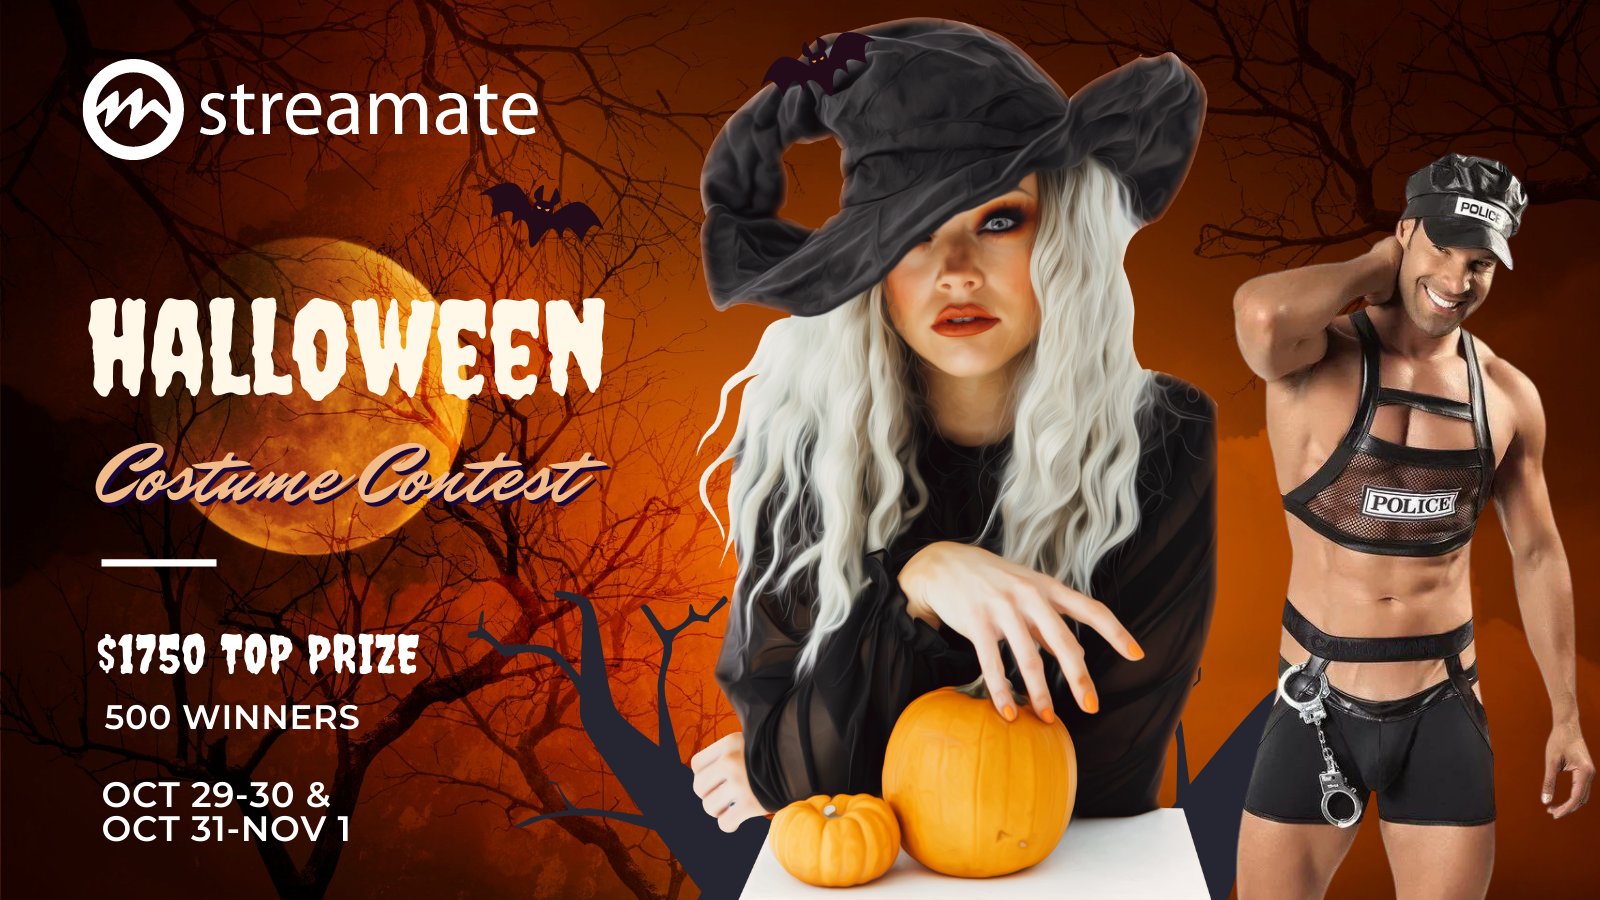 Halloween Contest And Costume Ideas For Cammodels.